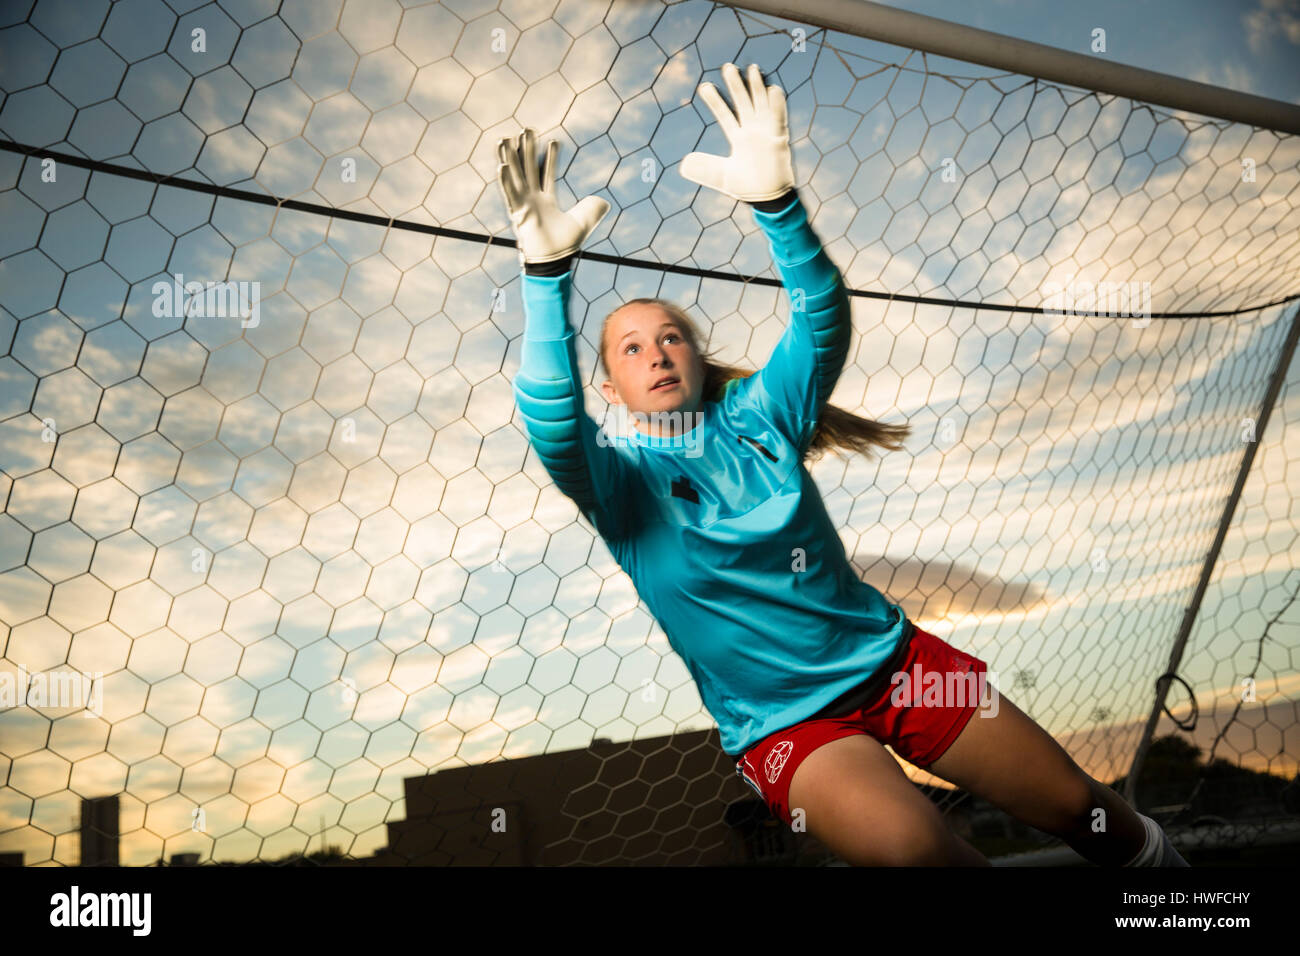 Low angle view of goalie jumping and reaching for soccer ball in goal under blue sky Stock Photo